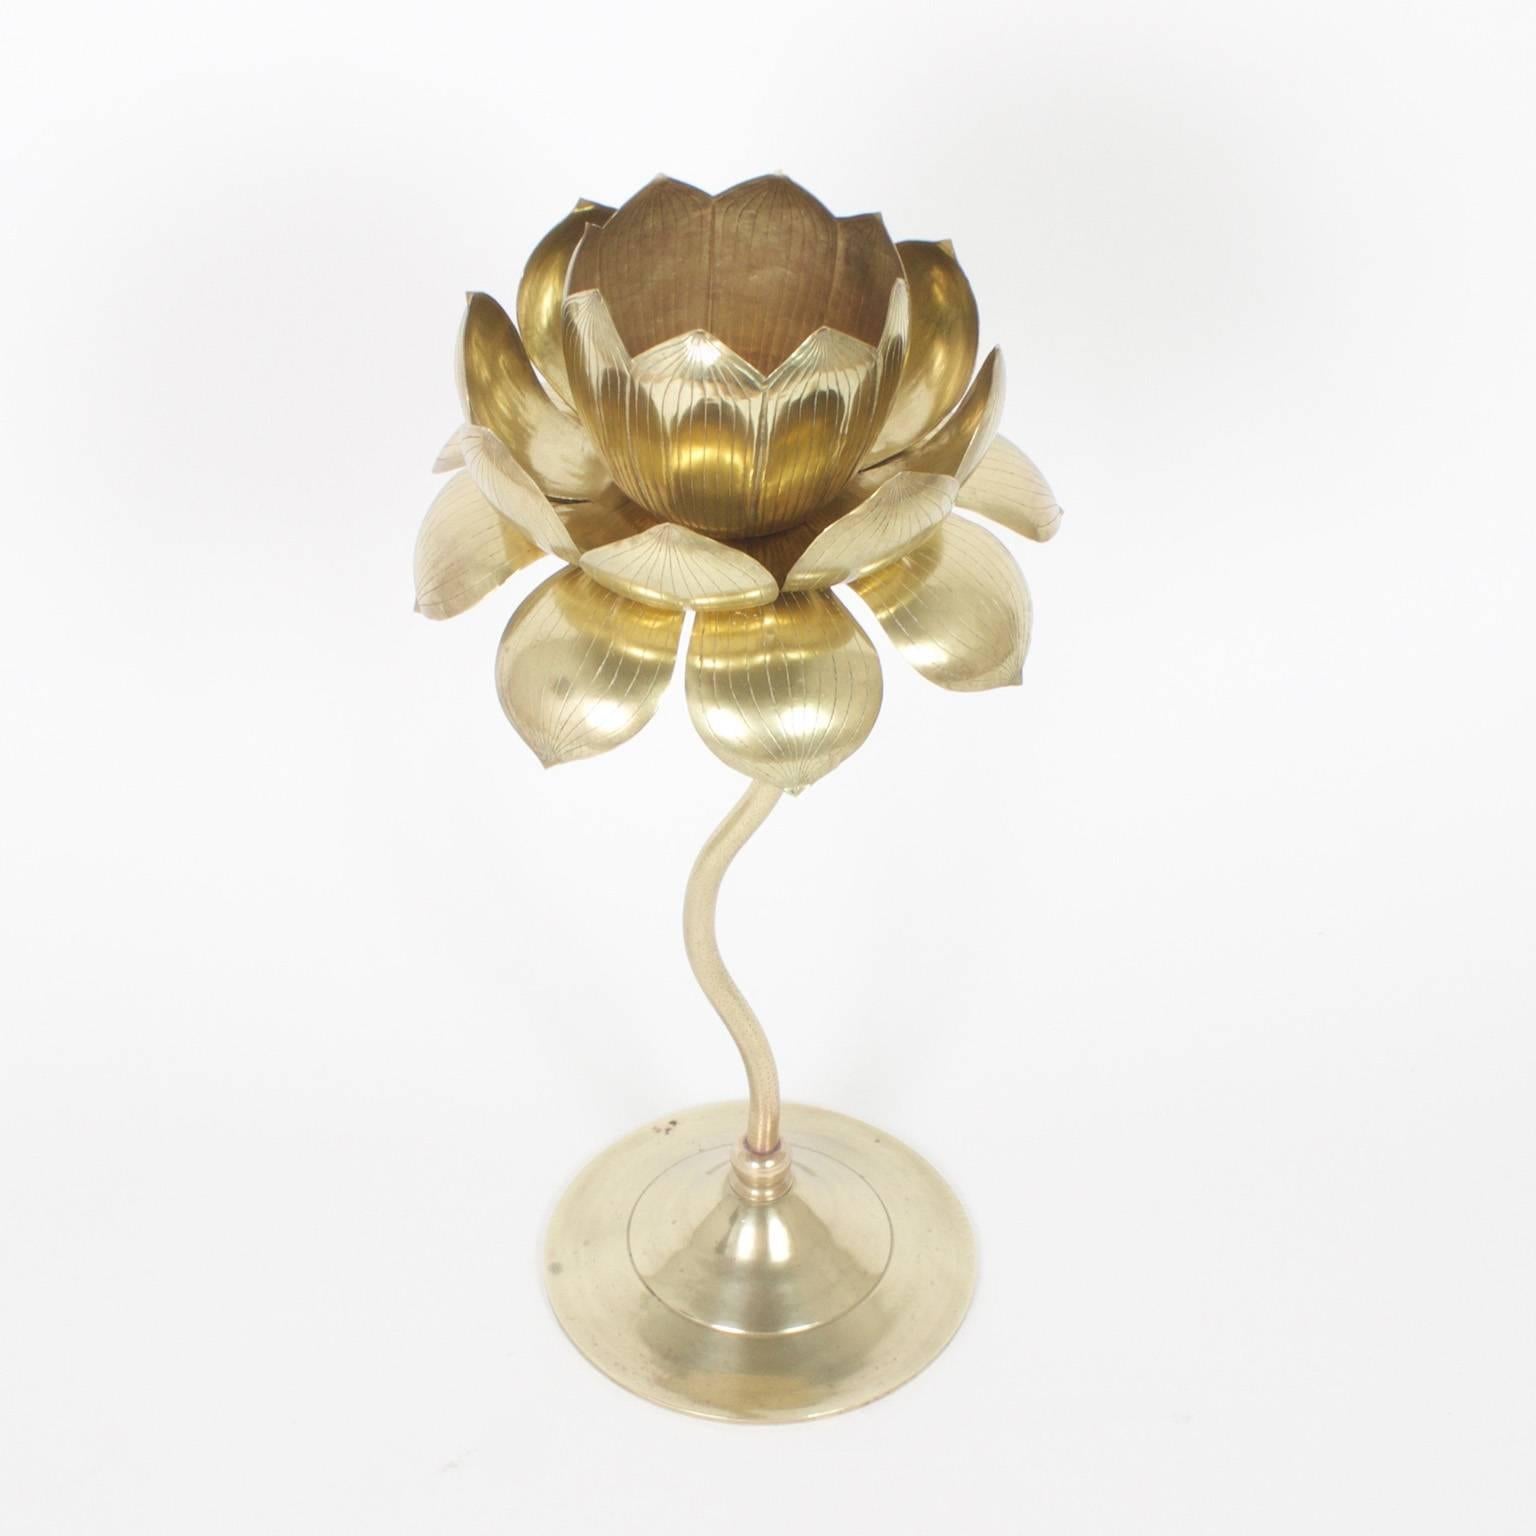 Exotic, Mid-Century lotus candlestick crafted with brass. The cup will hold a votive or wide candle surrounded by leaves with etched veins sitting on top of a realistic stem on a classic turned base. Newly polished. Probably by Feldman.

.
  